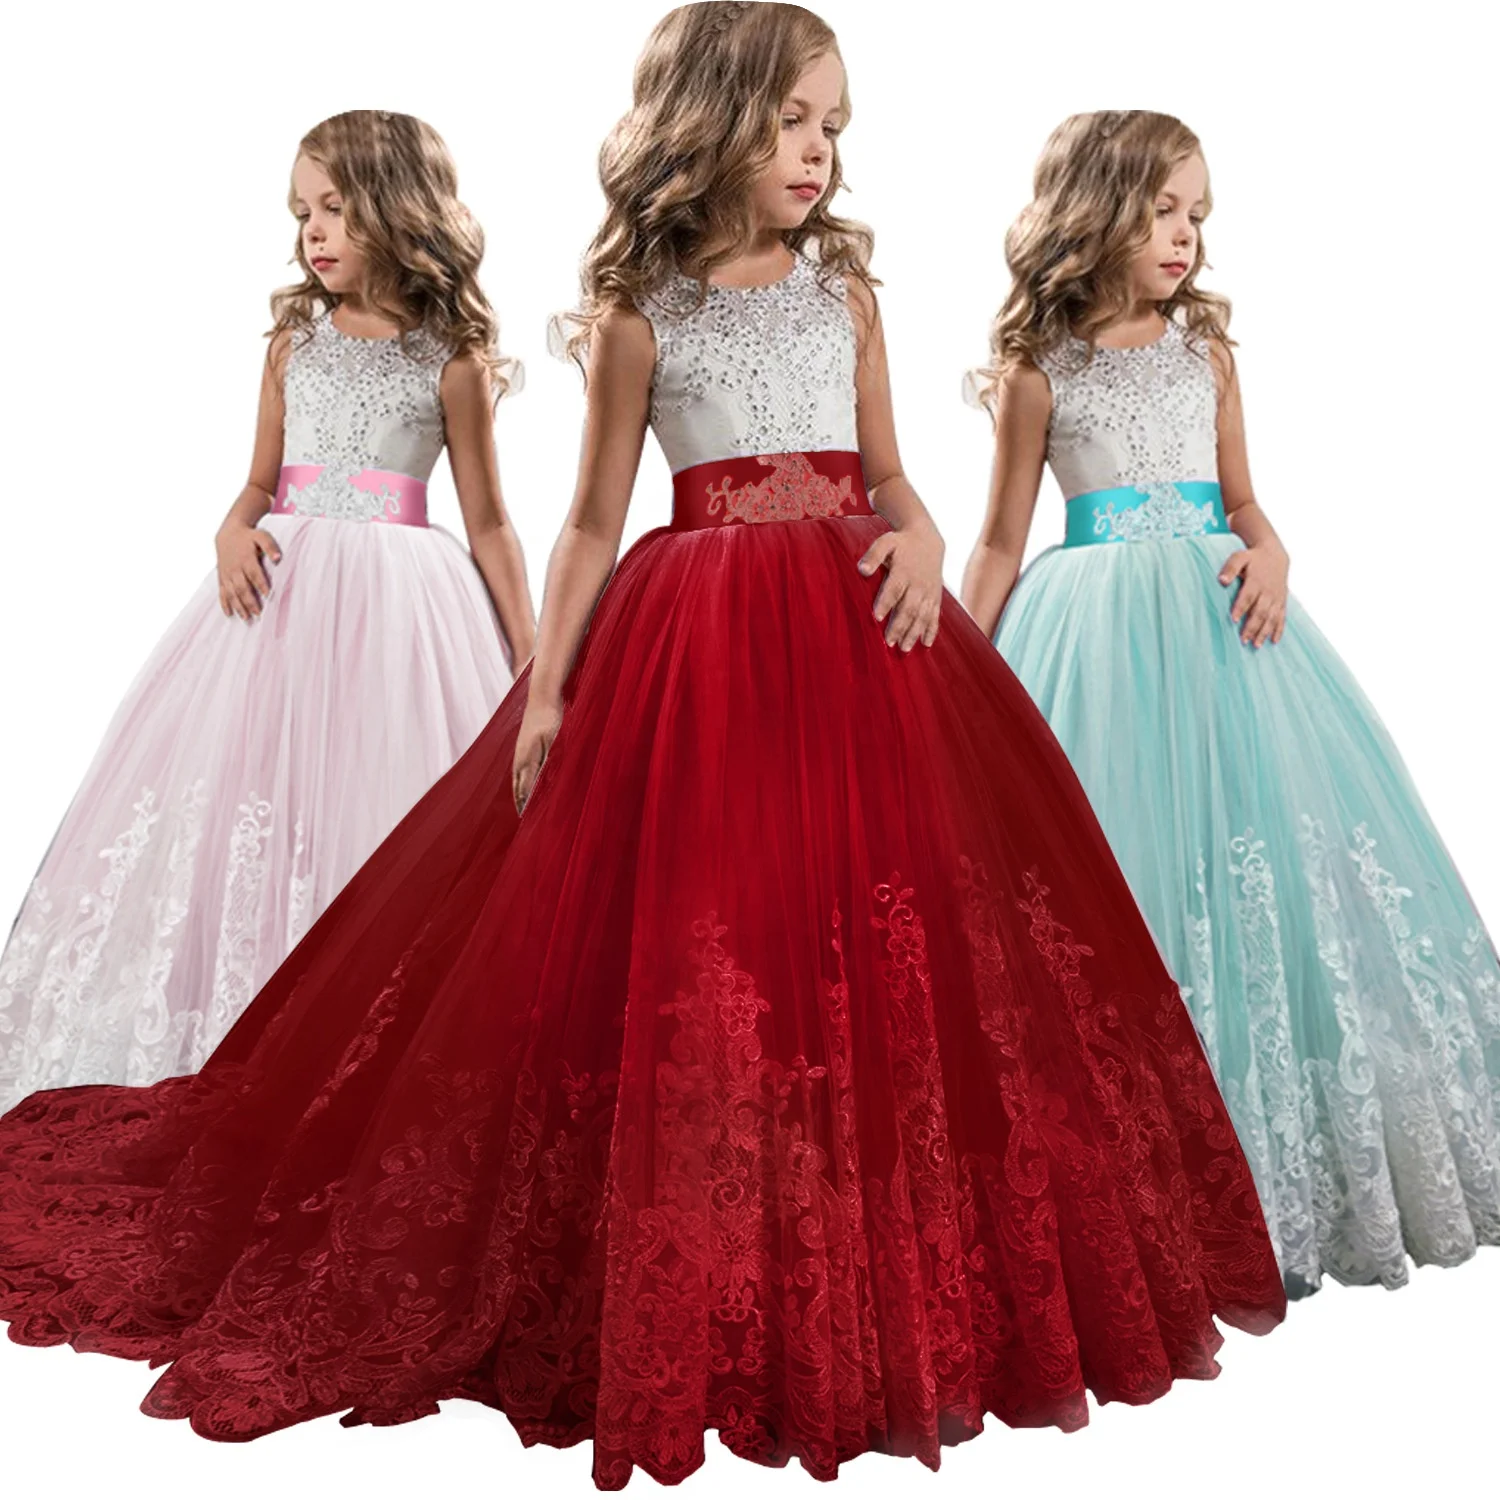 5-15 Years Girls Princess Pageant Dresses Kids Wedding Party Evening Formal Prom Ball Gown Costume Dress up 